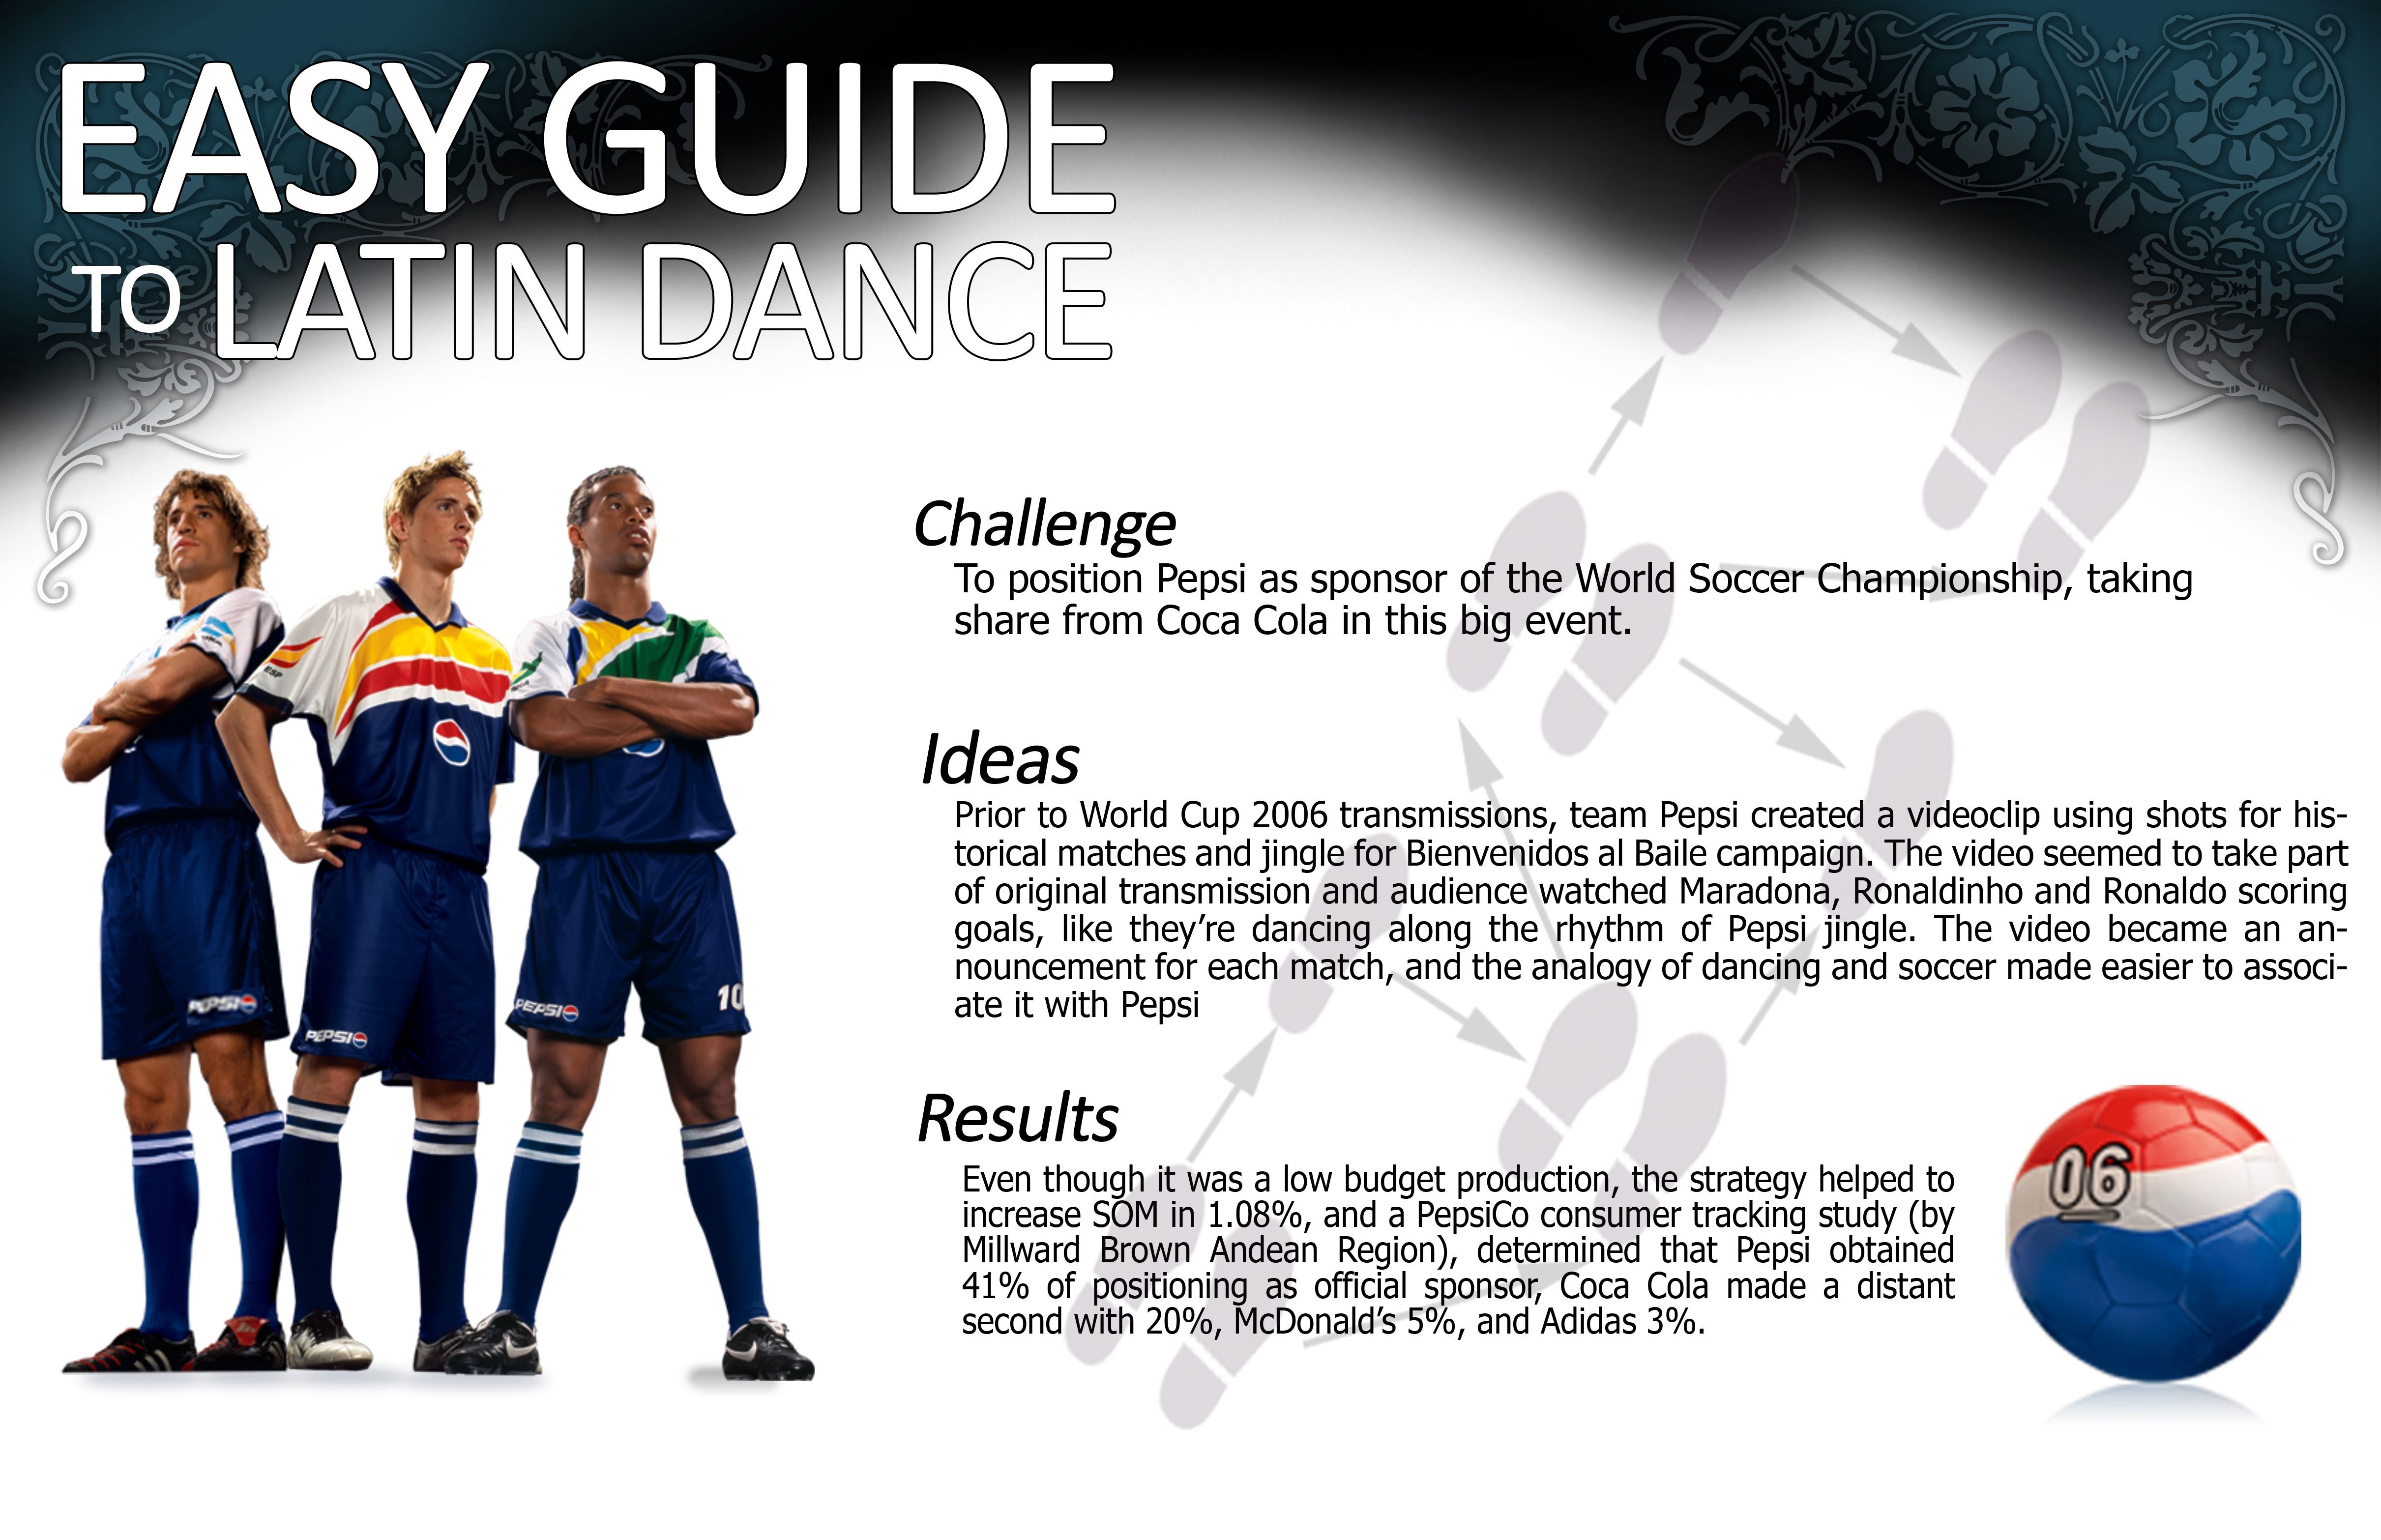 EASY GUIDE TO LATIN DANCE